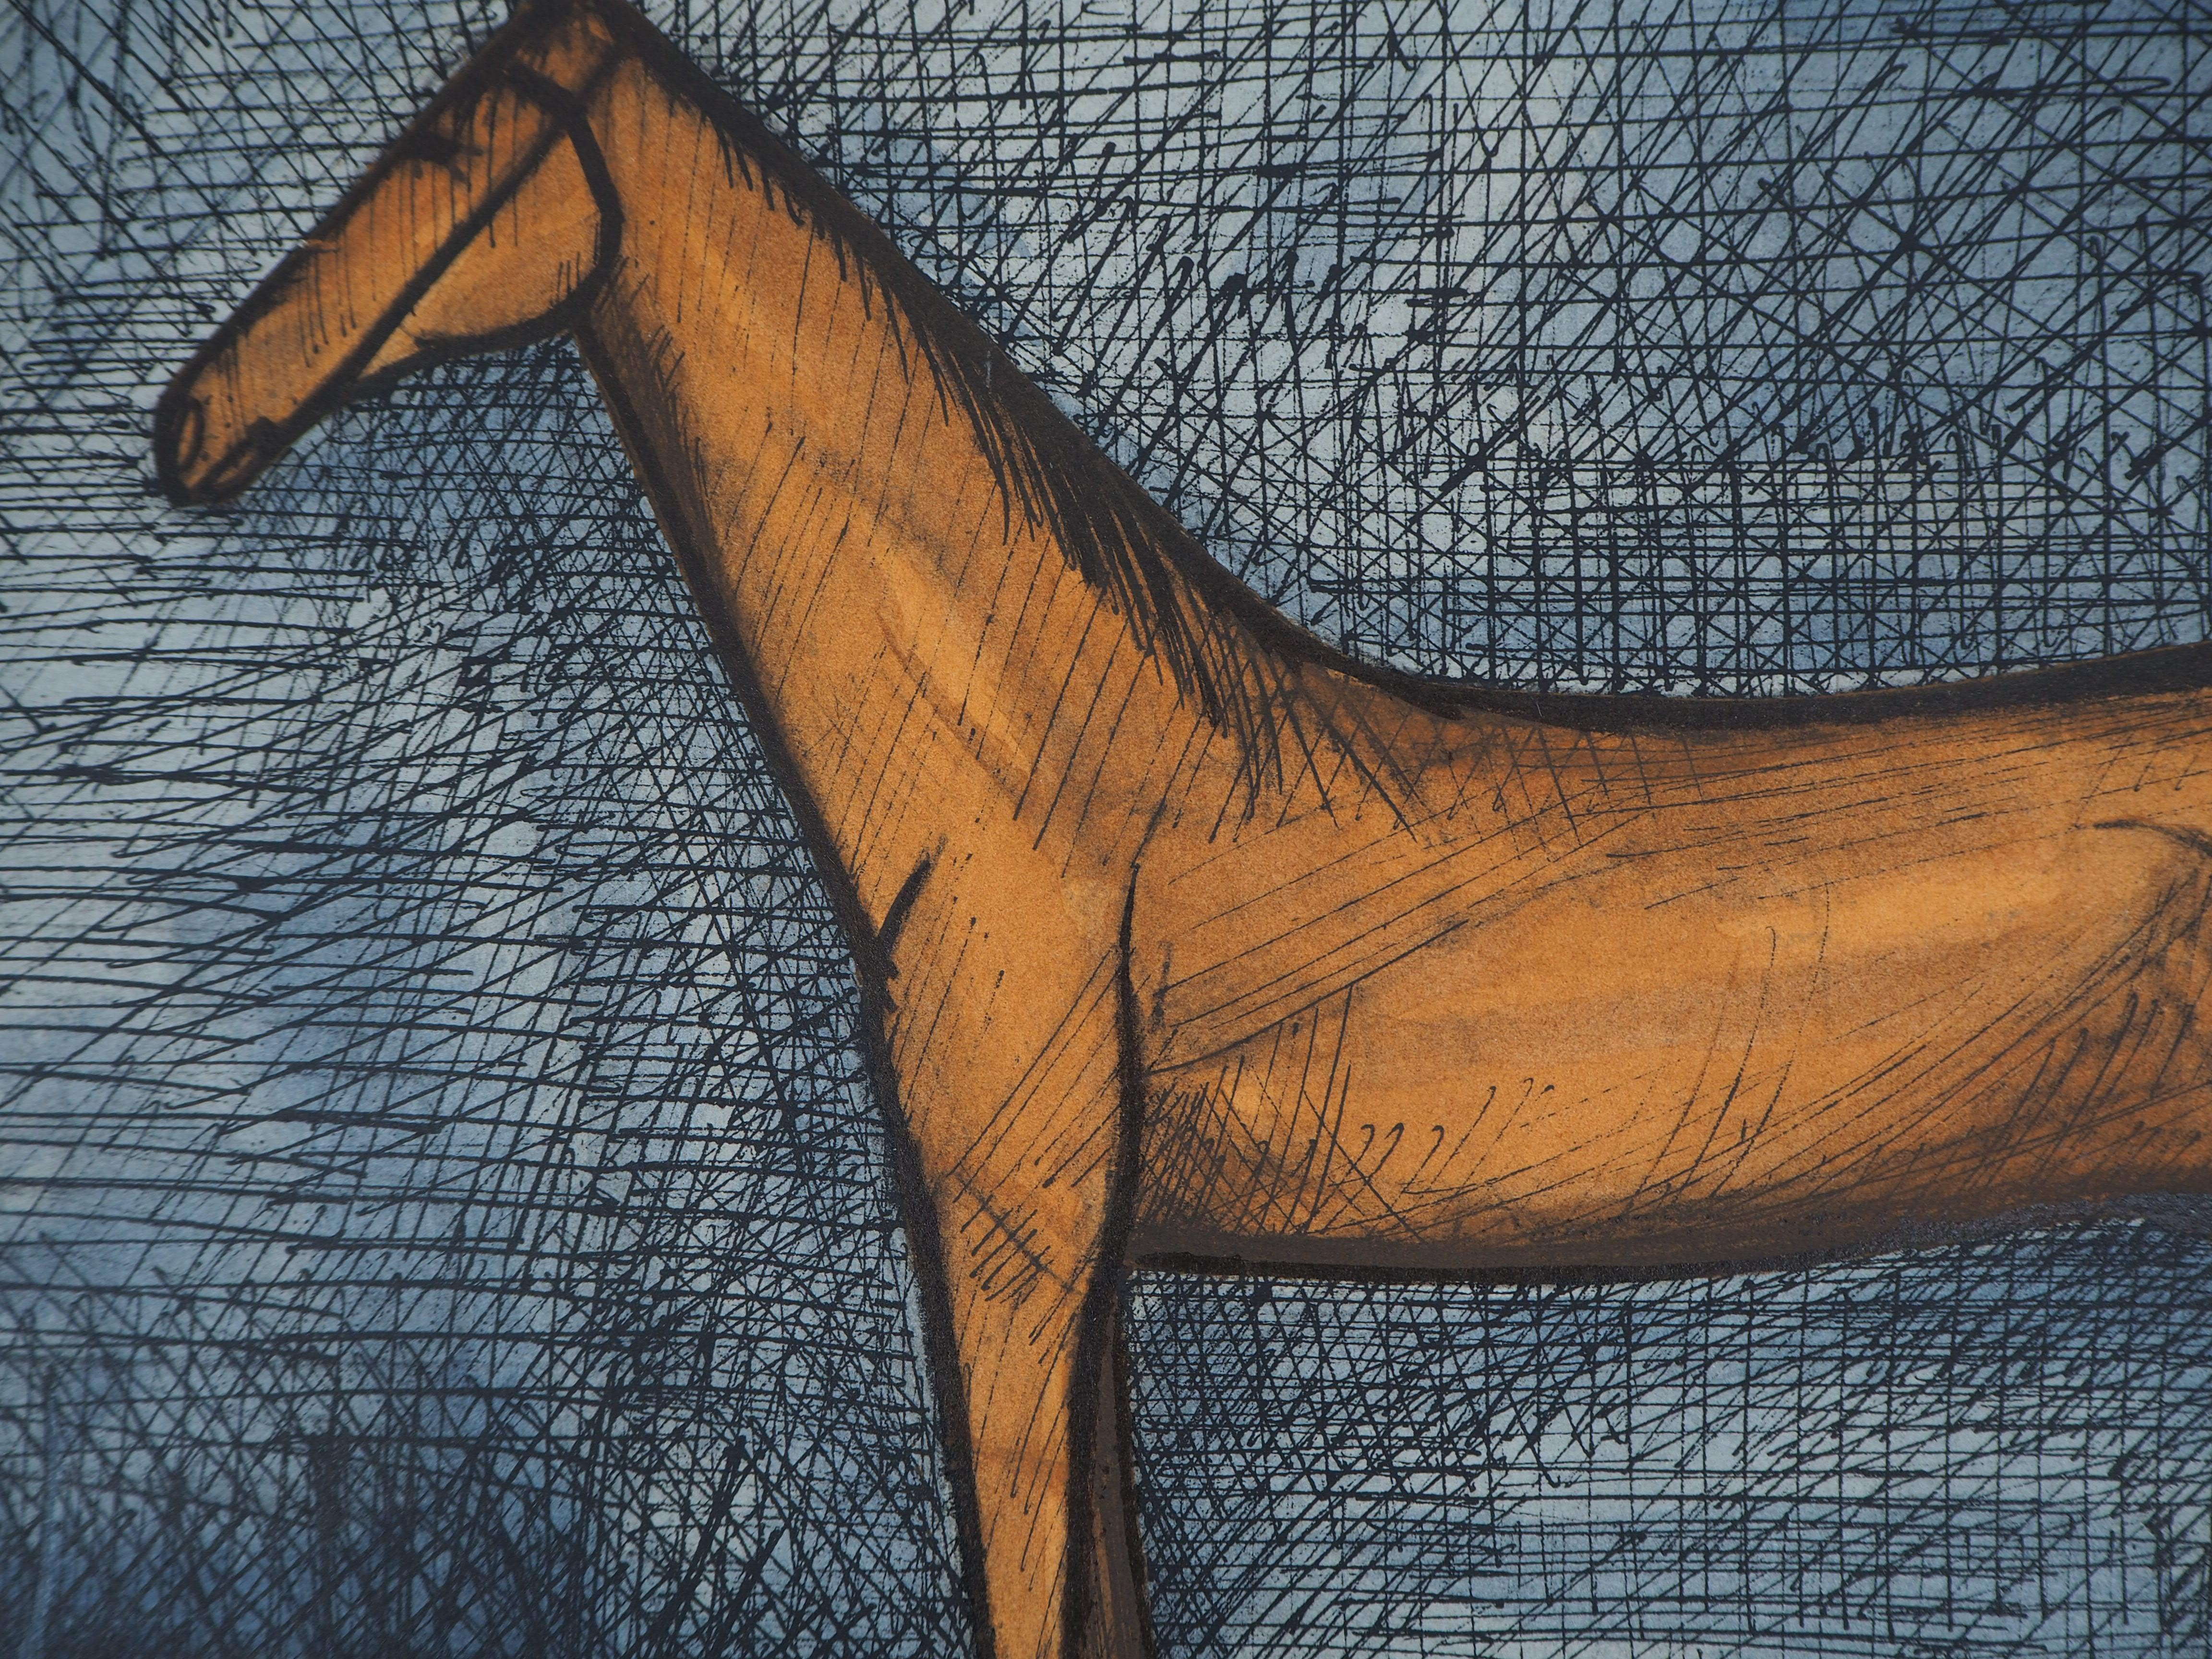 The Thoroughbred Horse - Lithograph - Gray Animal Print by Bernard Buffet